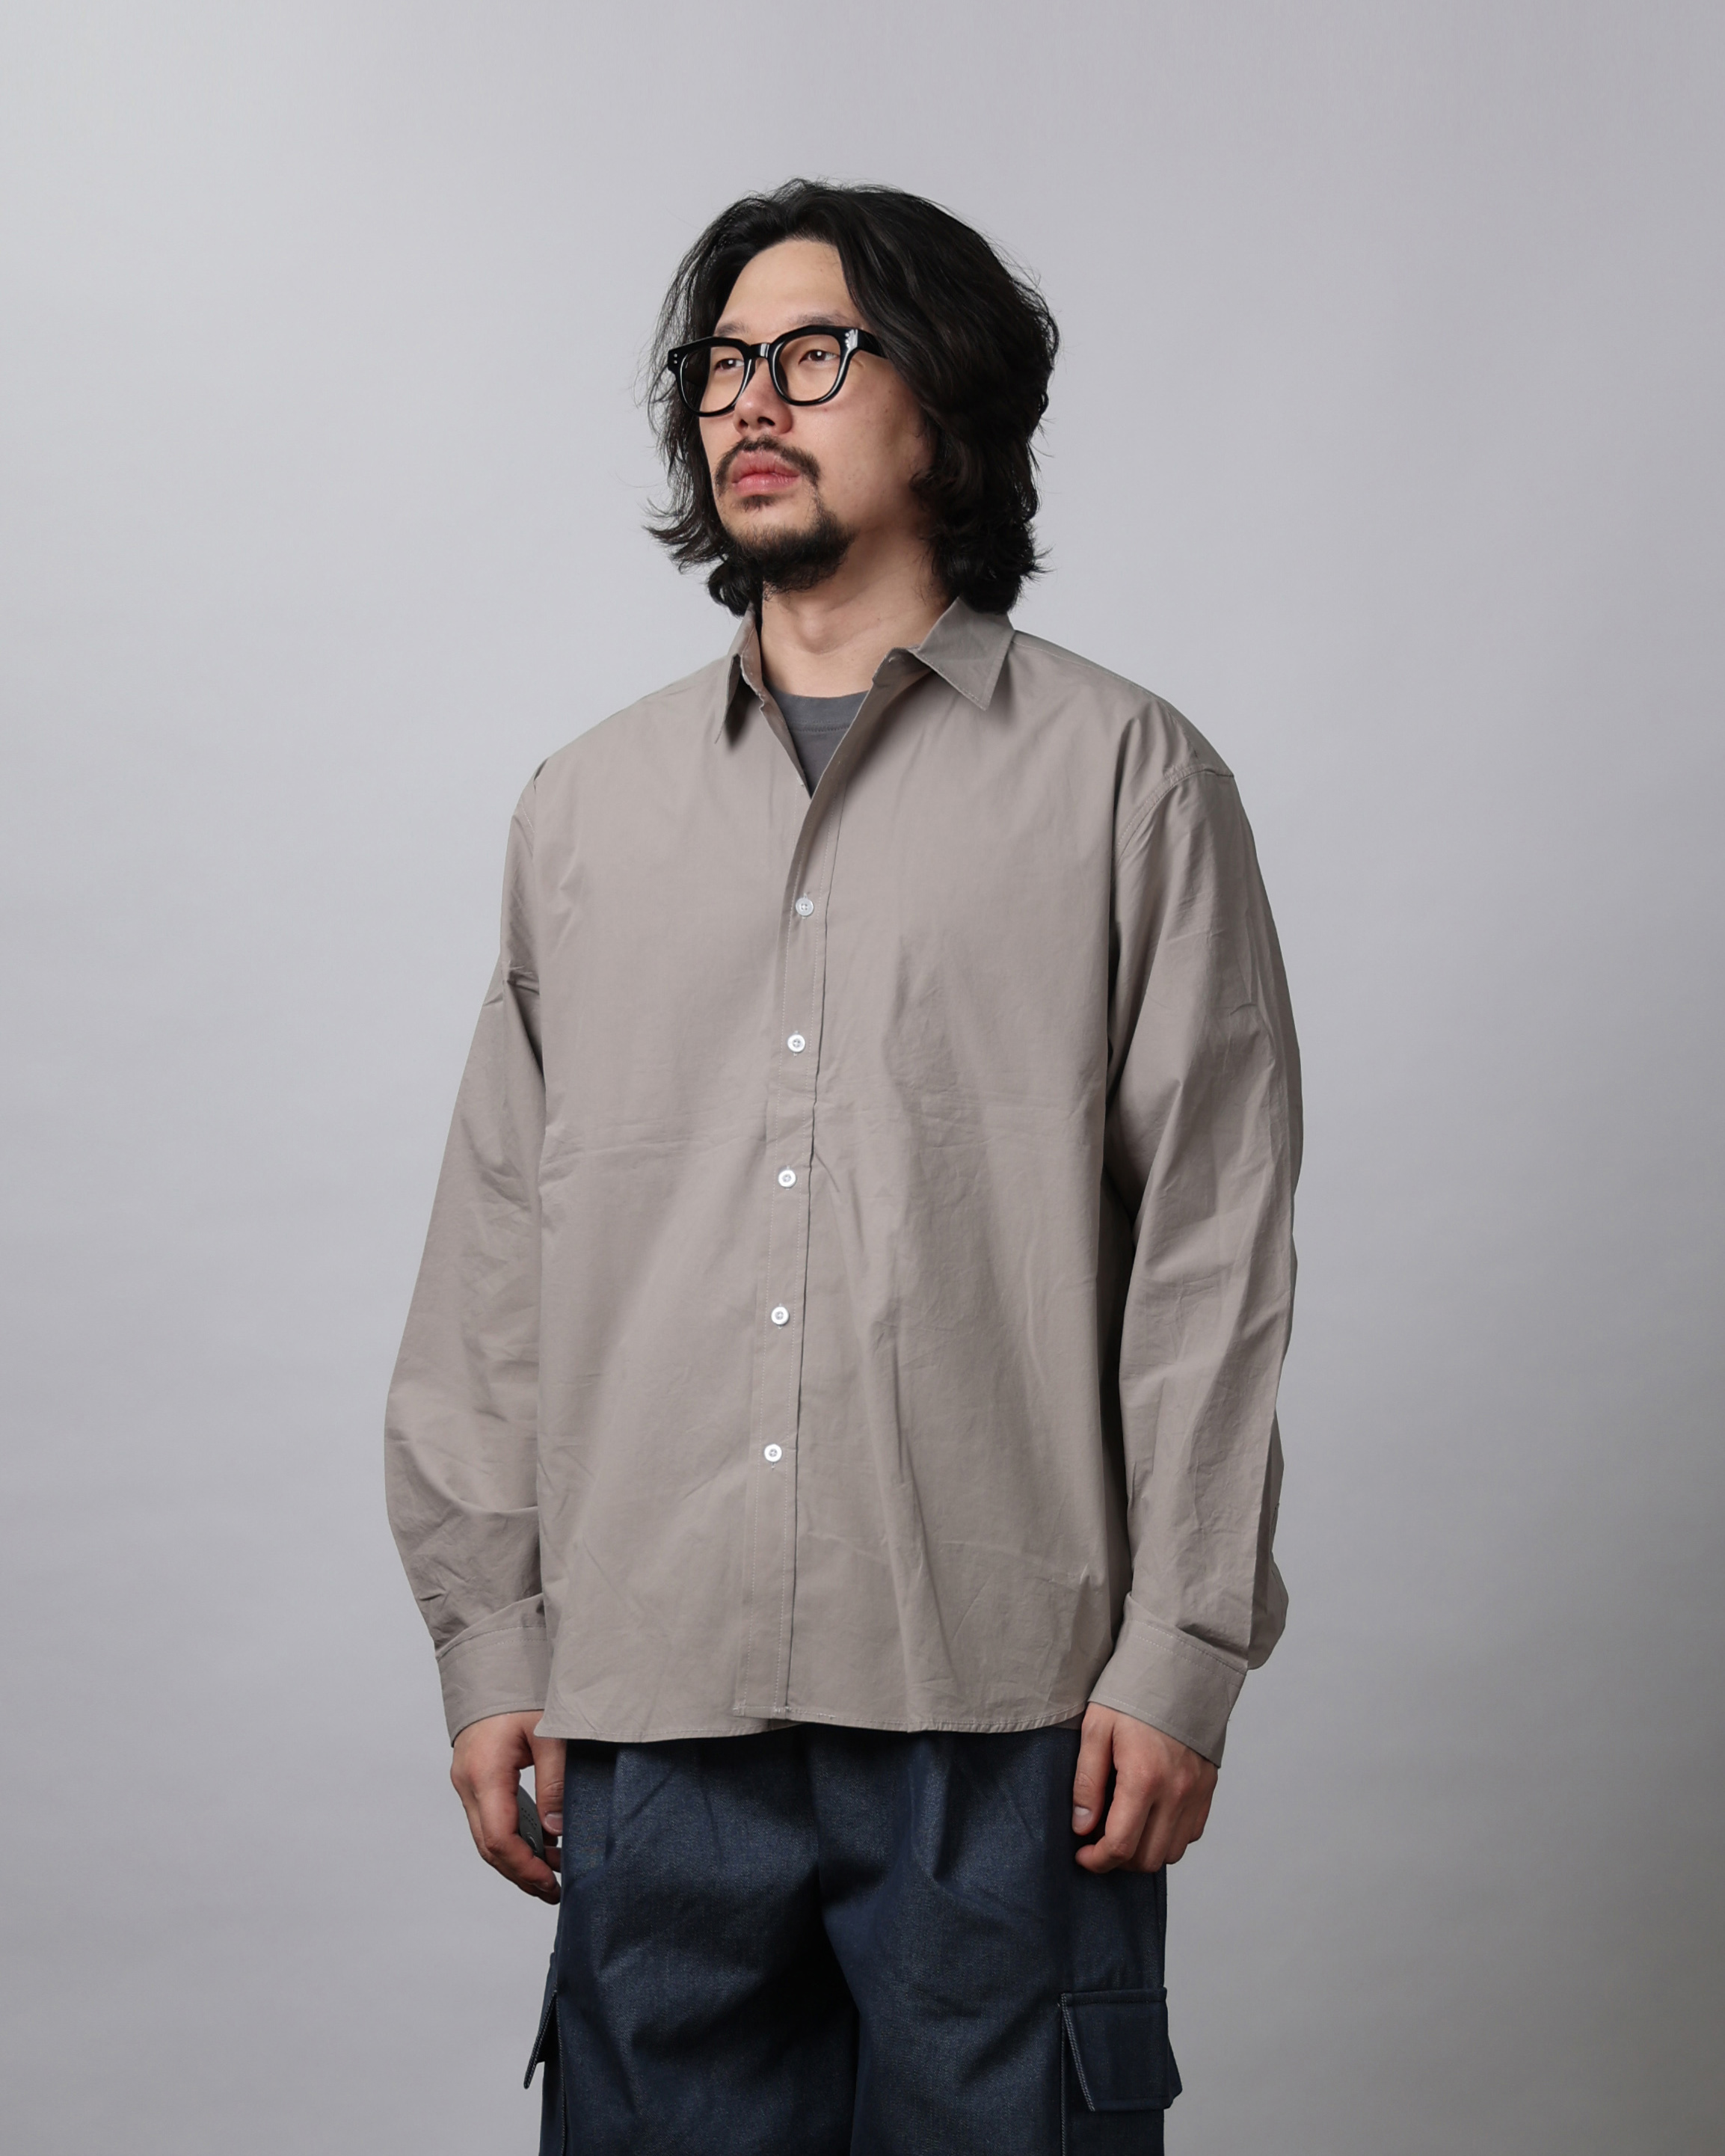 FREKS Modern Over Wide Daily Shirts (Charcoal/Navy/Deep Beige/Mint/Sky Blue/Pink/Cream/White)